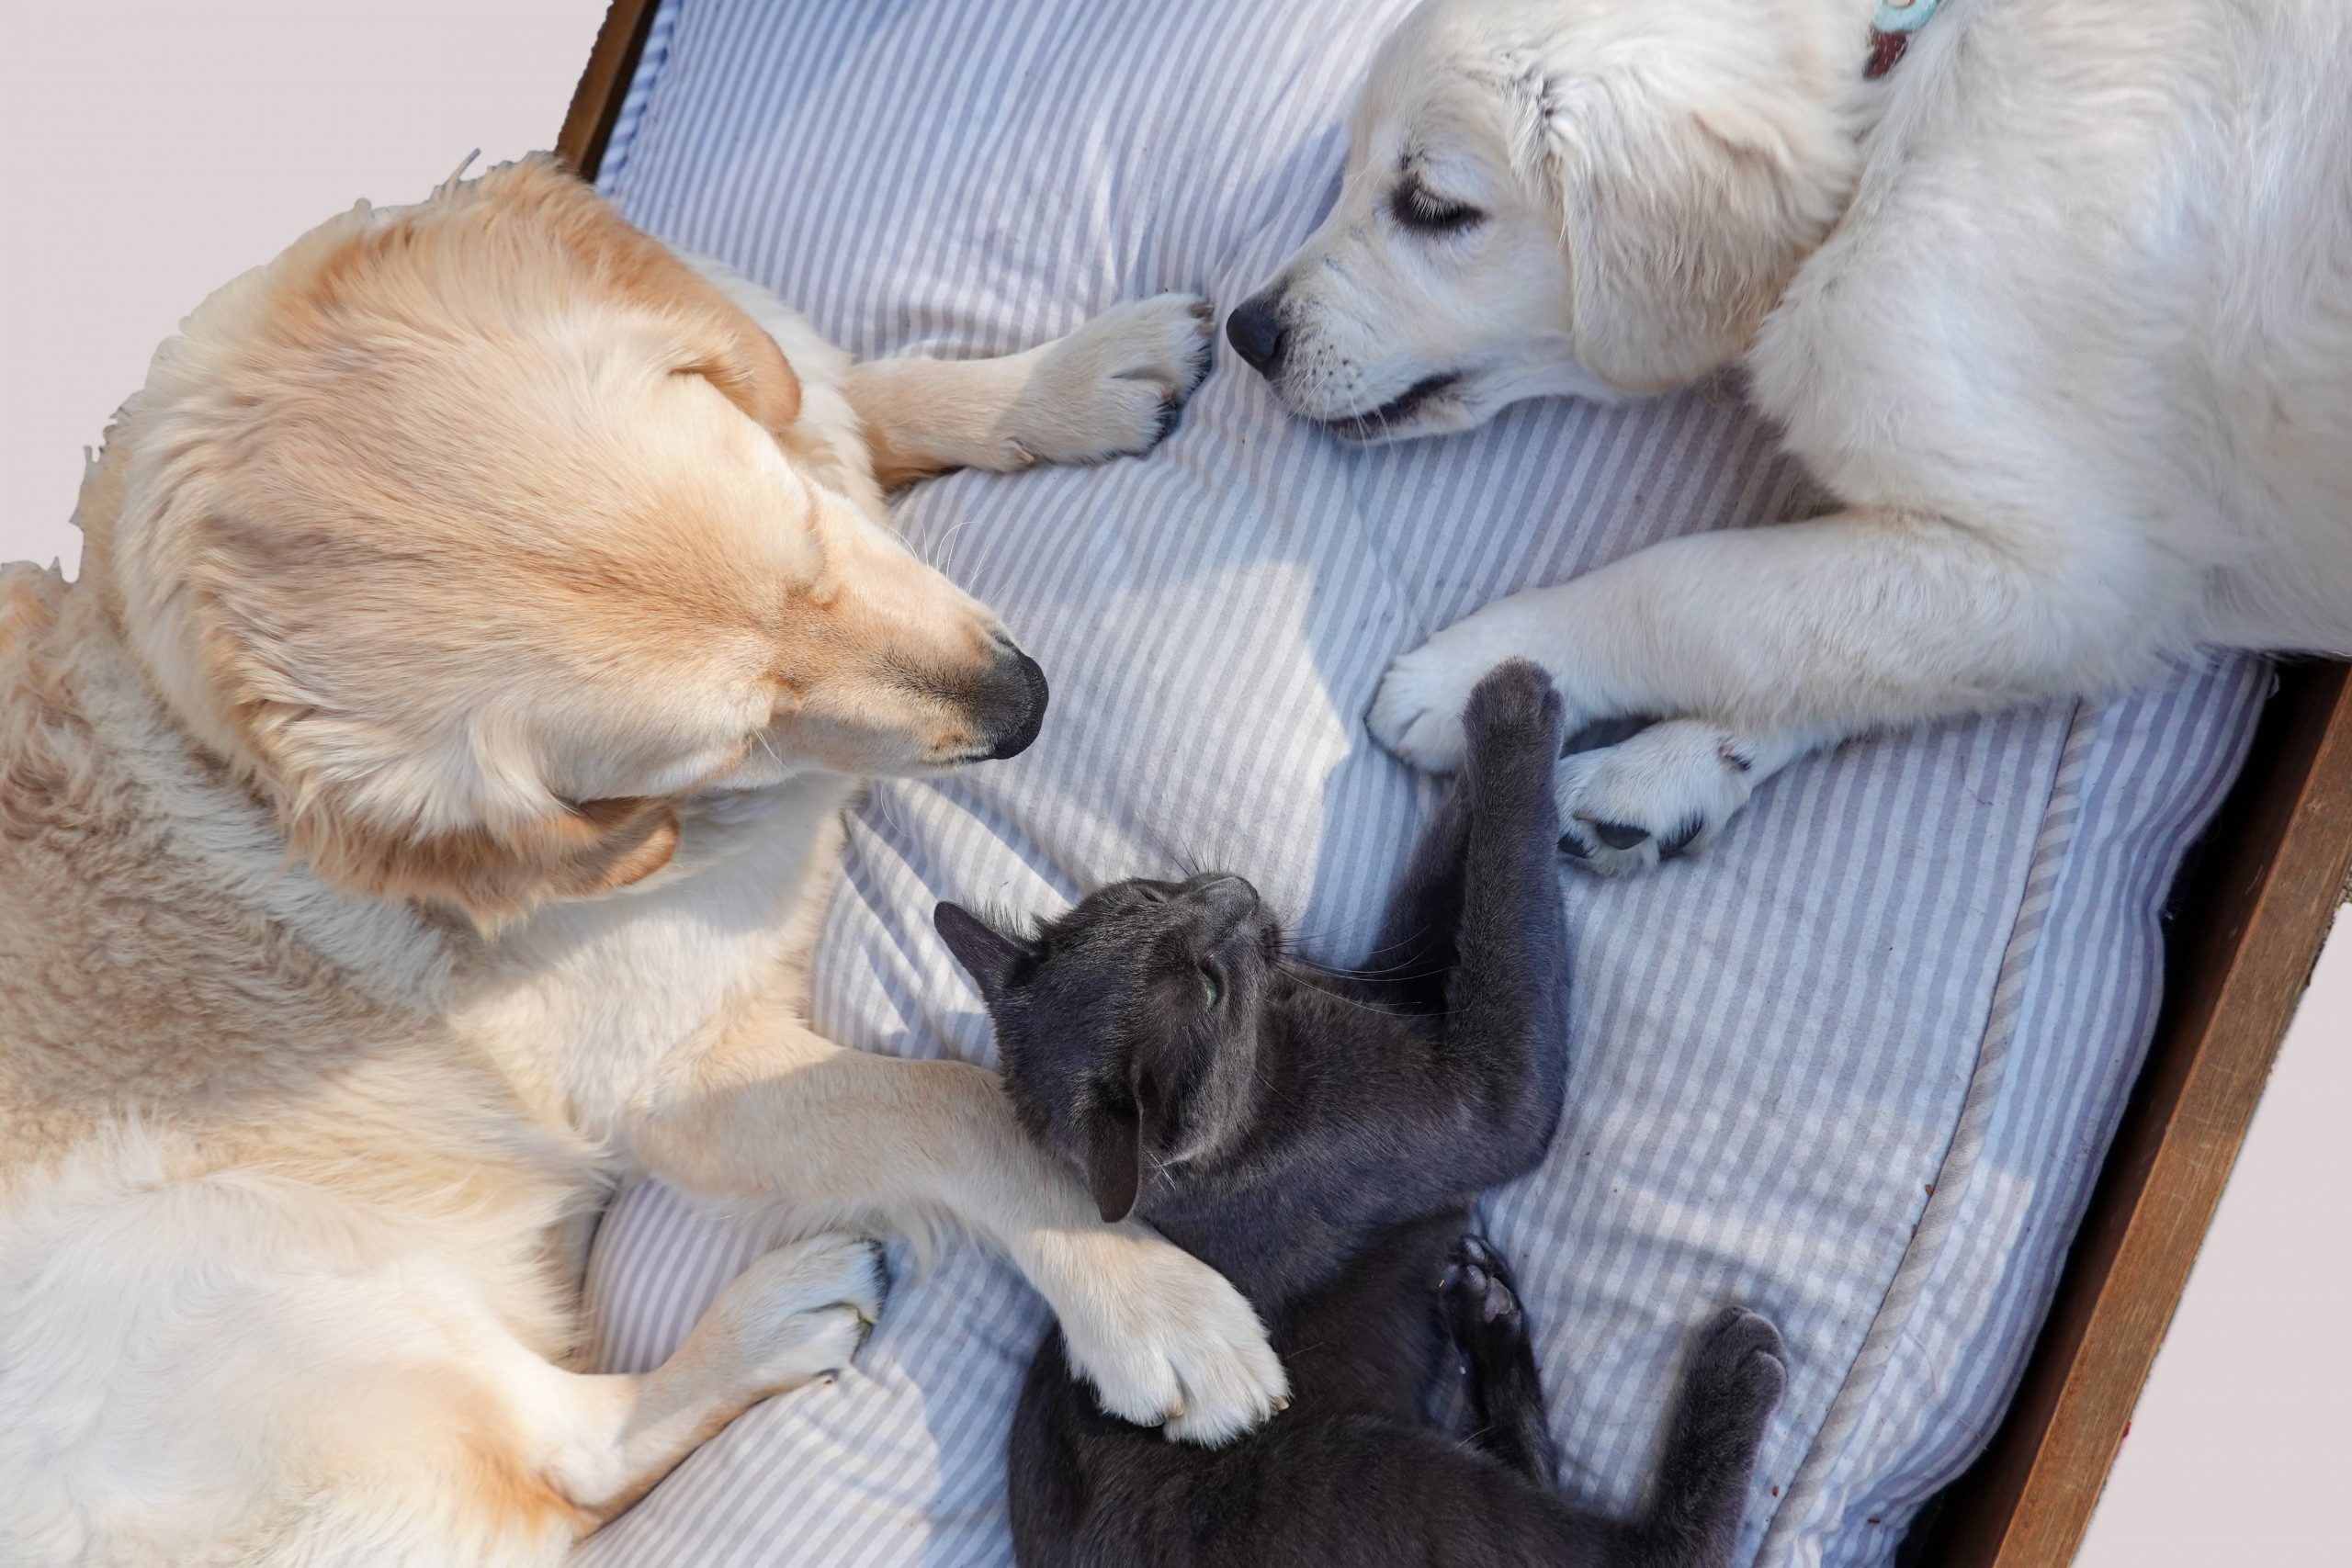 Dog-Friendly Cats and Cat-Friendly Dogs: Learning to Live Together